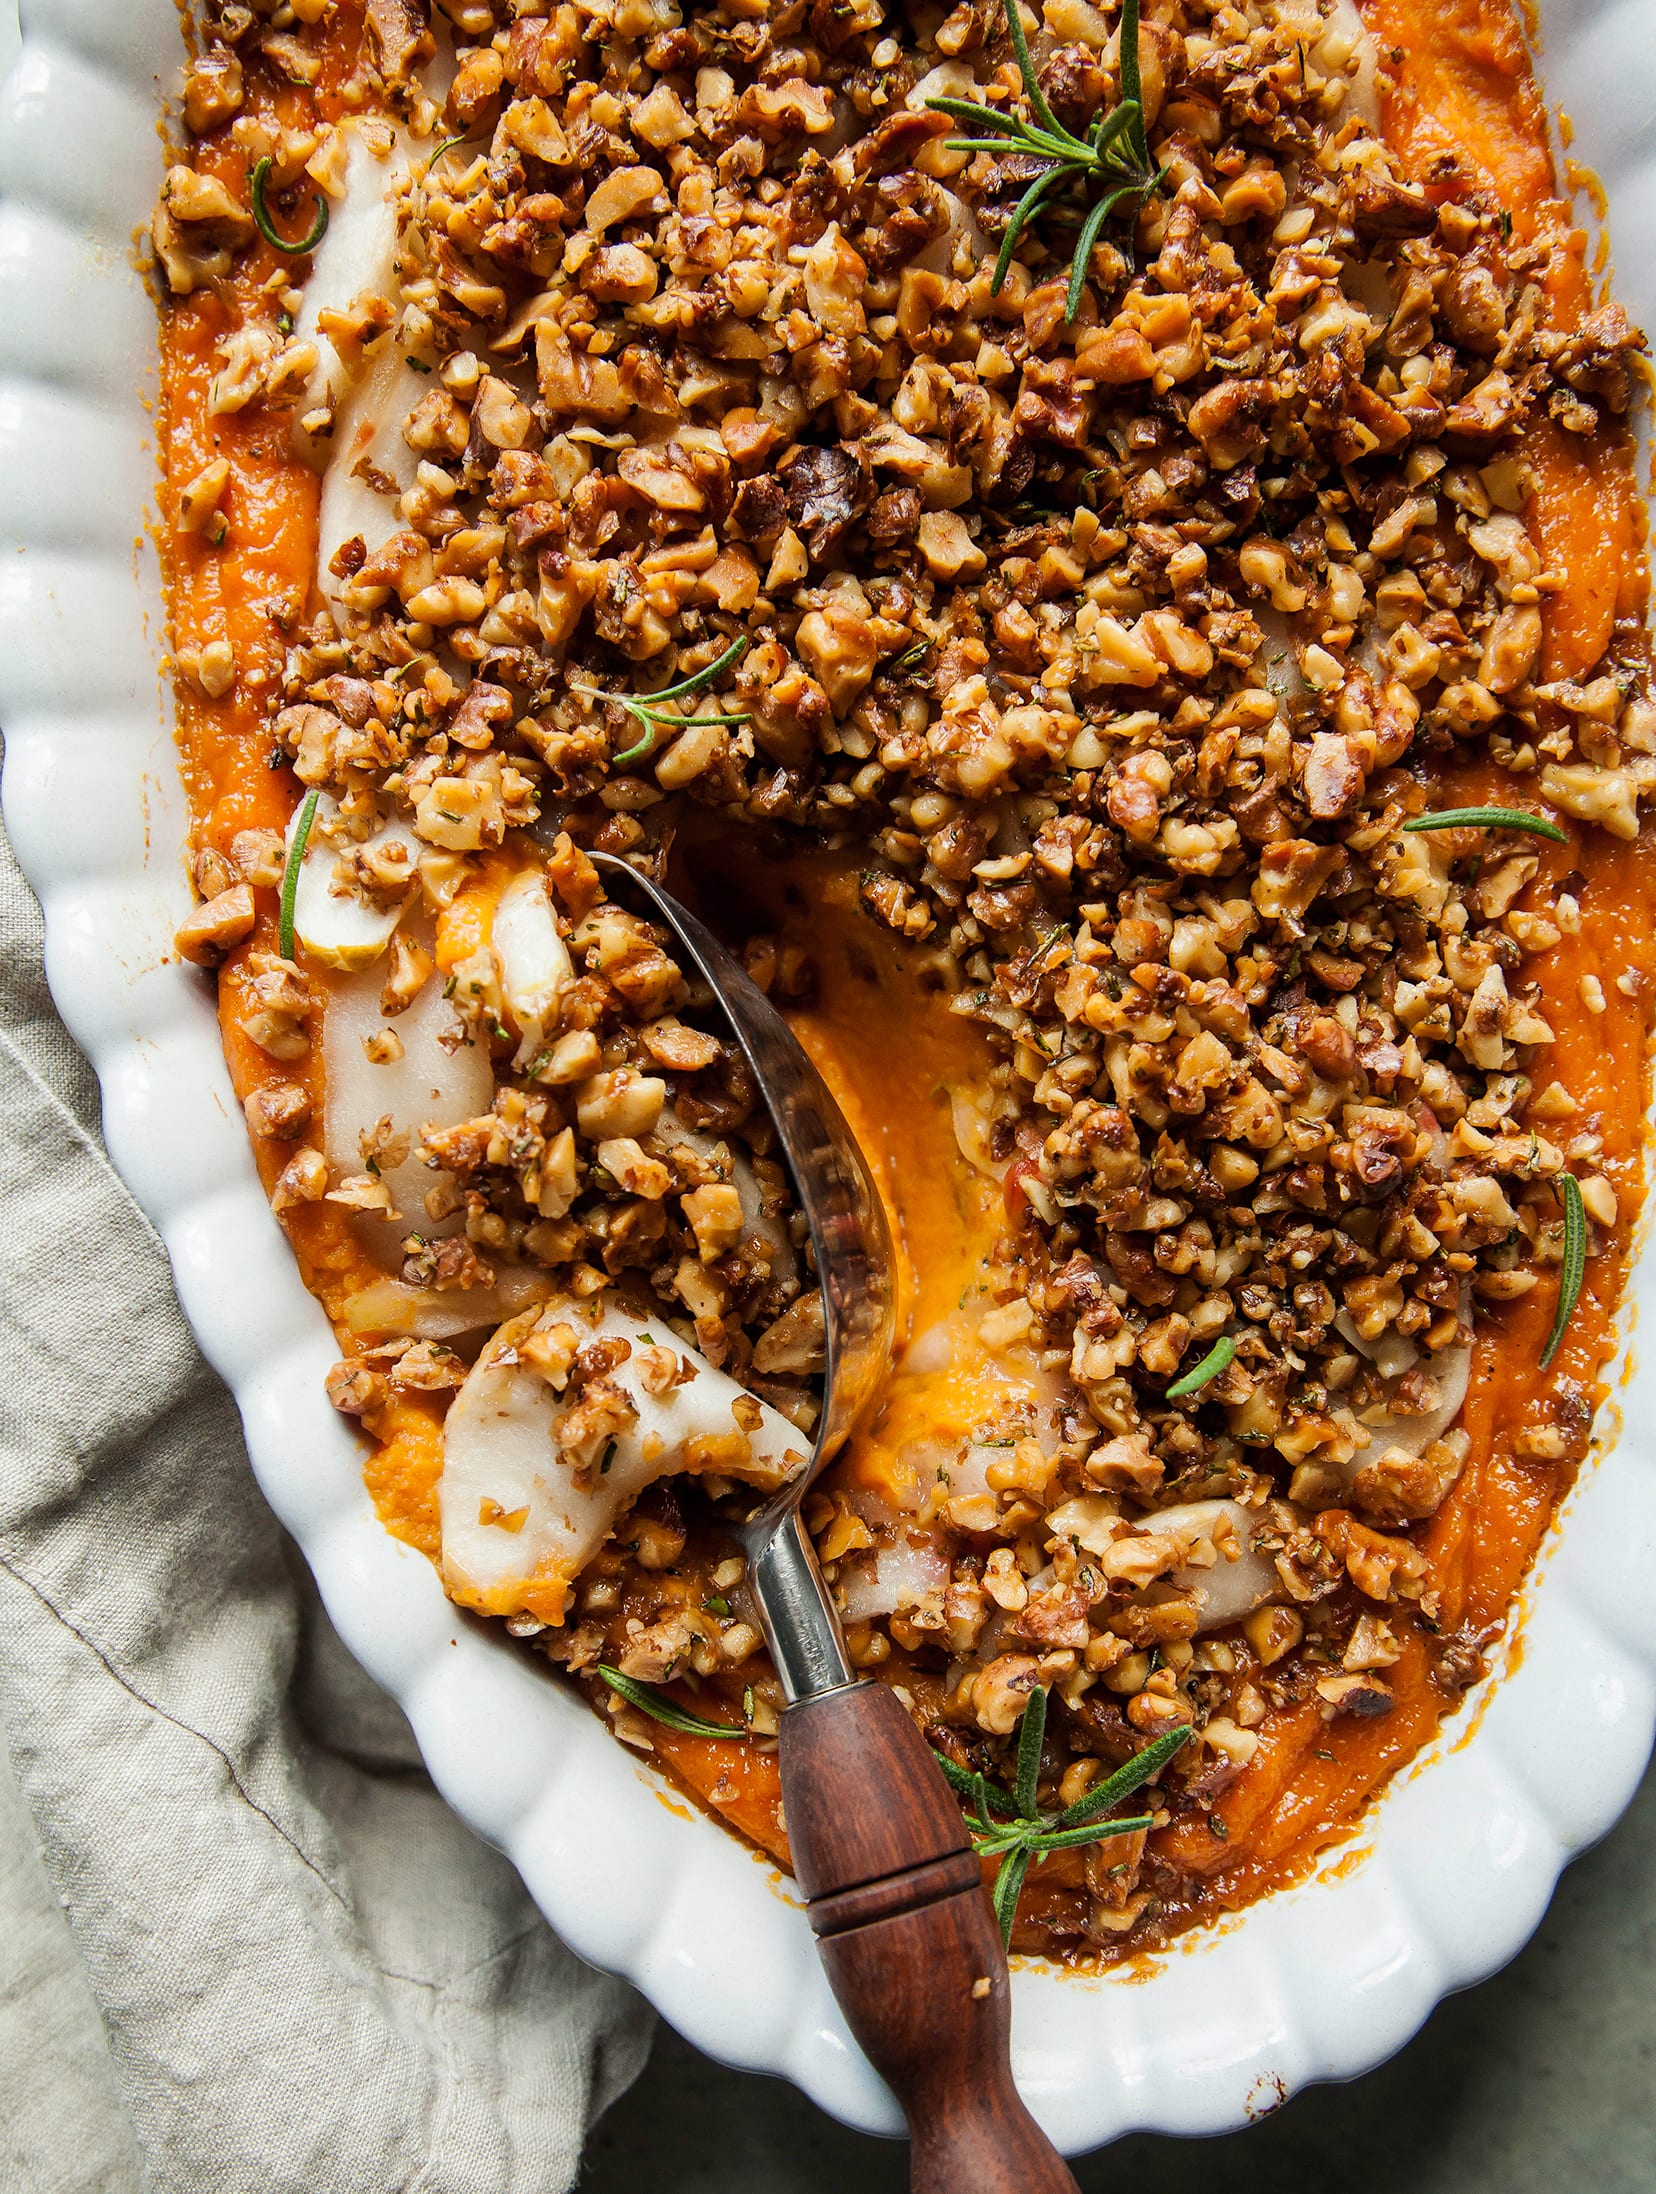 Vegan Sweet Potato Casserole with Apples and Crunchy Rosemary Walnuts